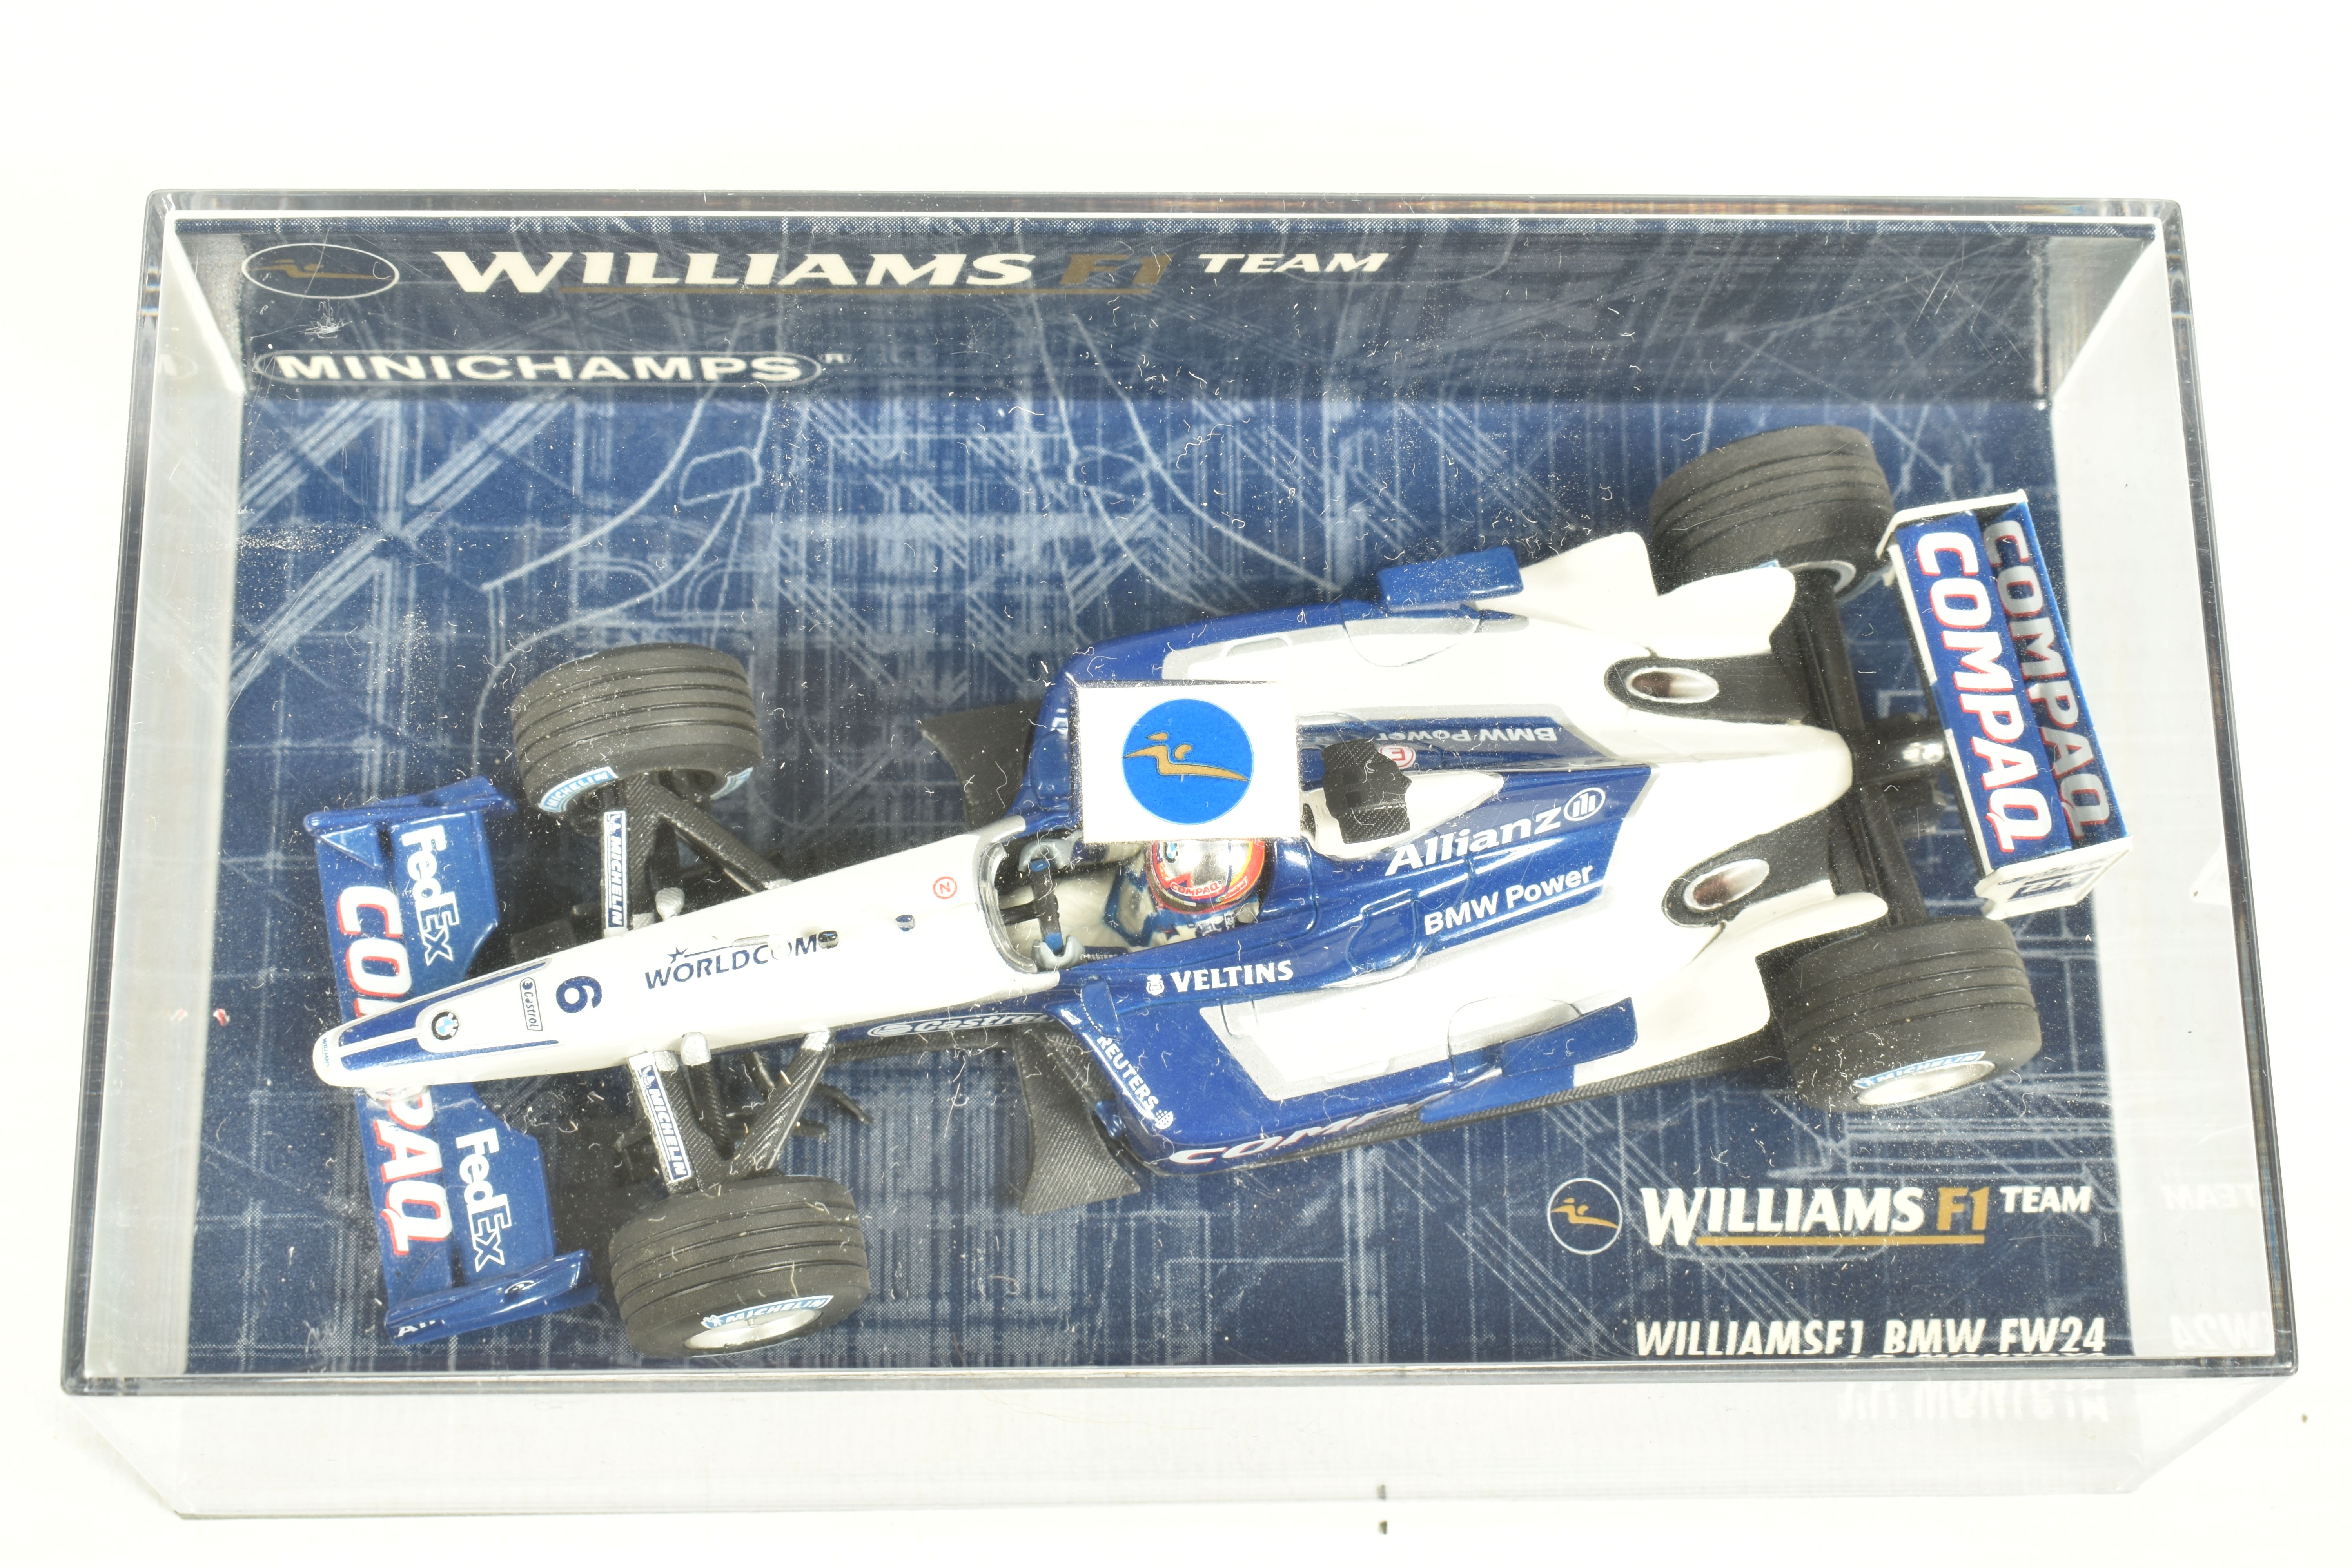 SEVEN MINICHAMP 1.43 SCALE DIECAST MODELS, to include a Williams F1 BMW RW26 JP Montoya, model no. - Image 12 of 16